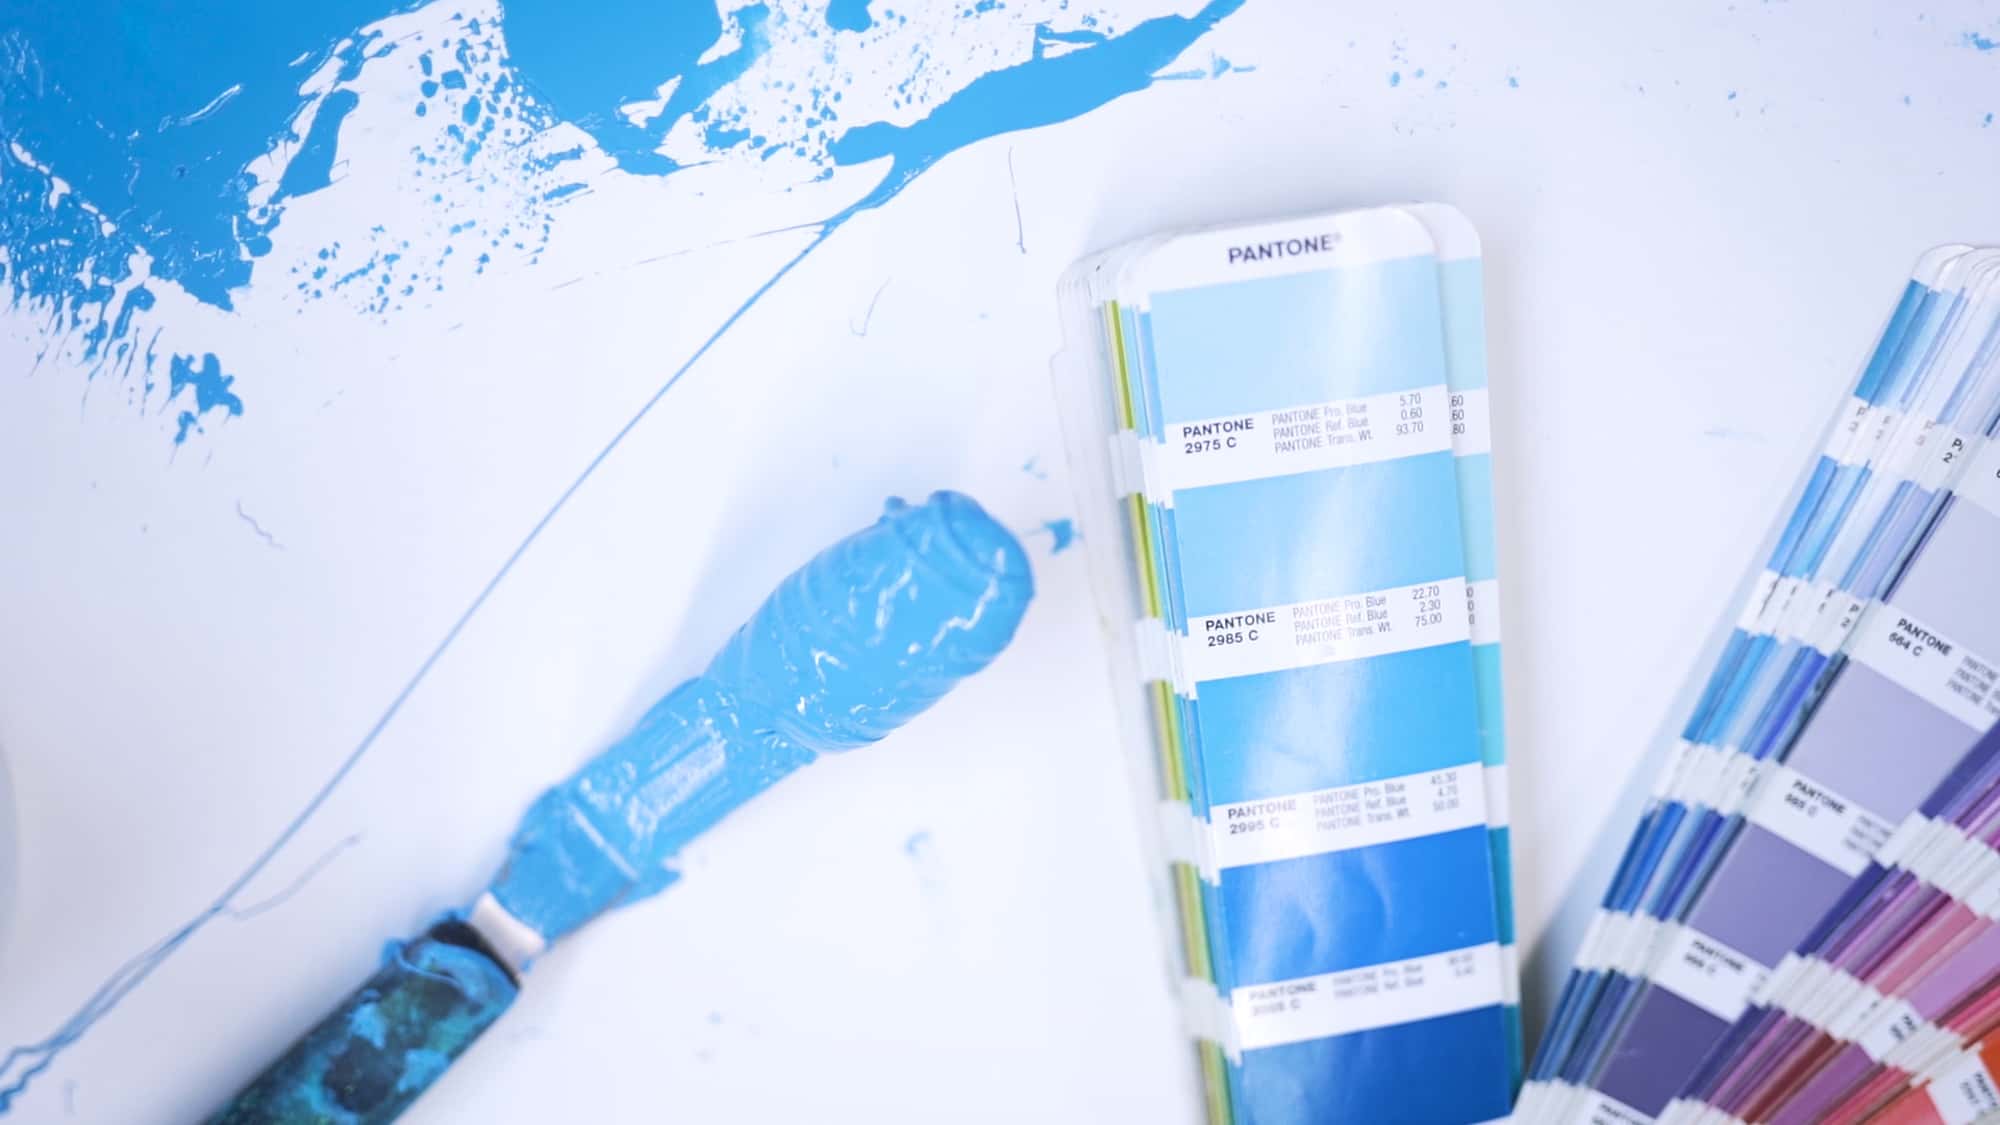 Mixed screen printing ink compared next to its matching Pantone color.